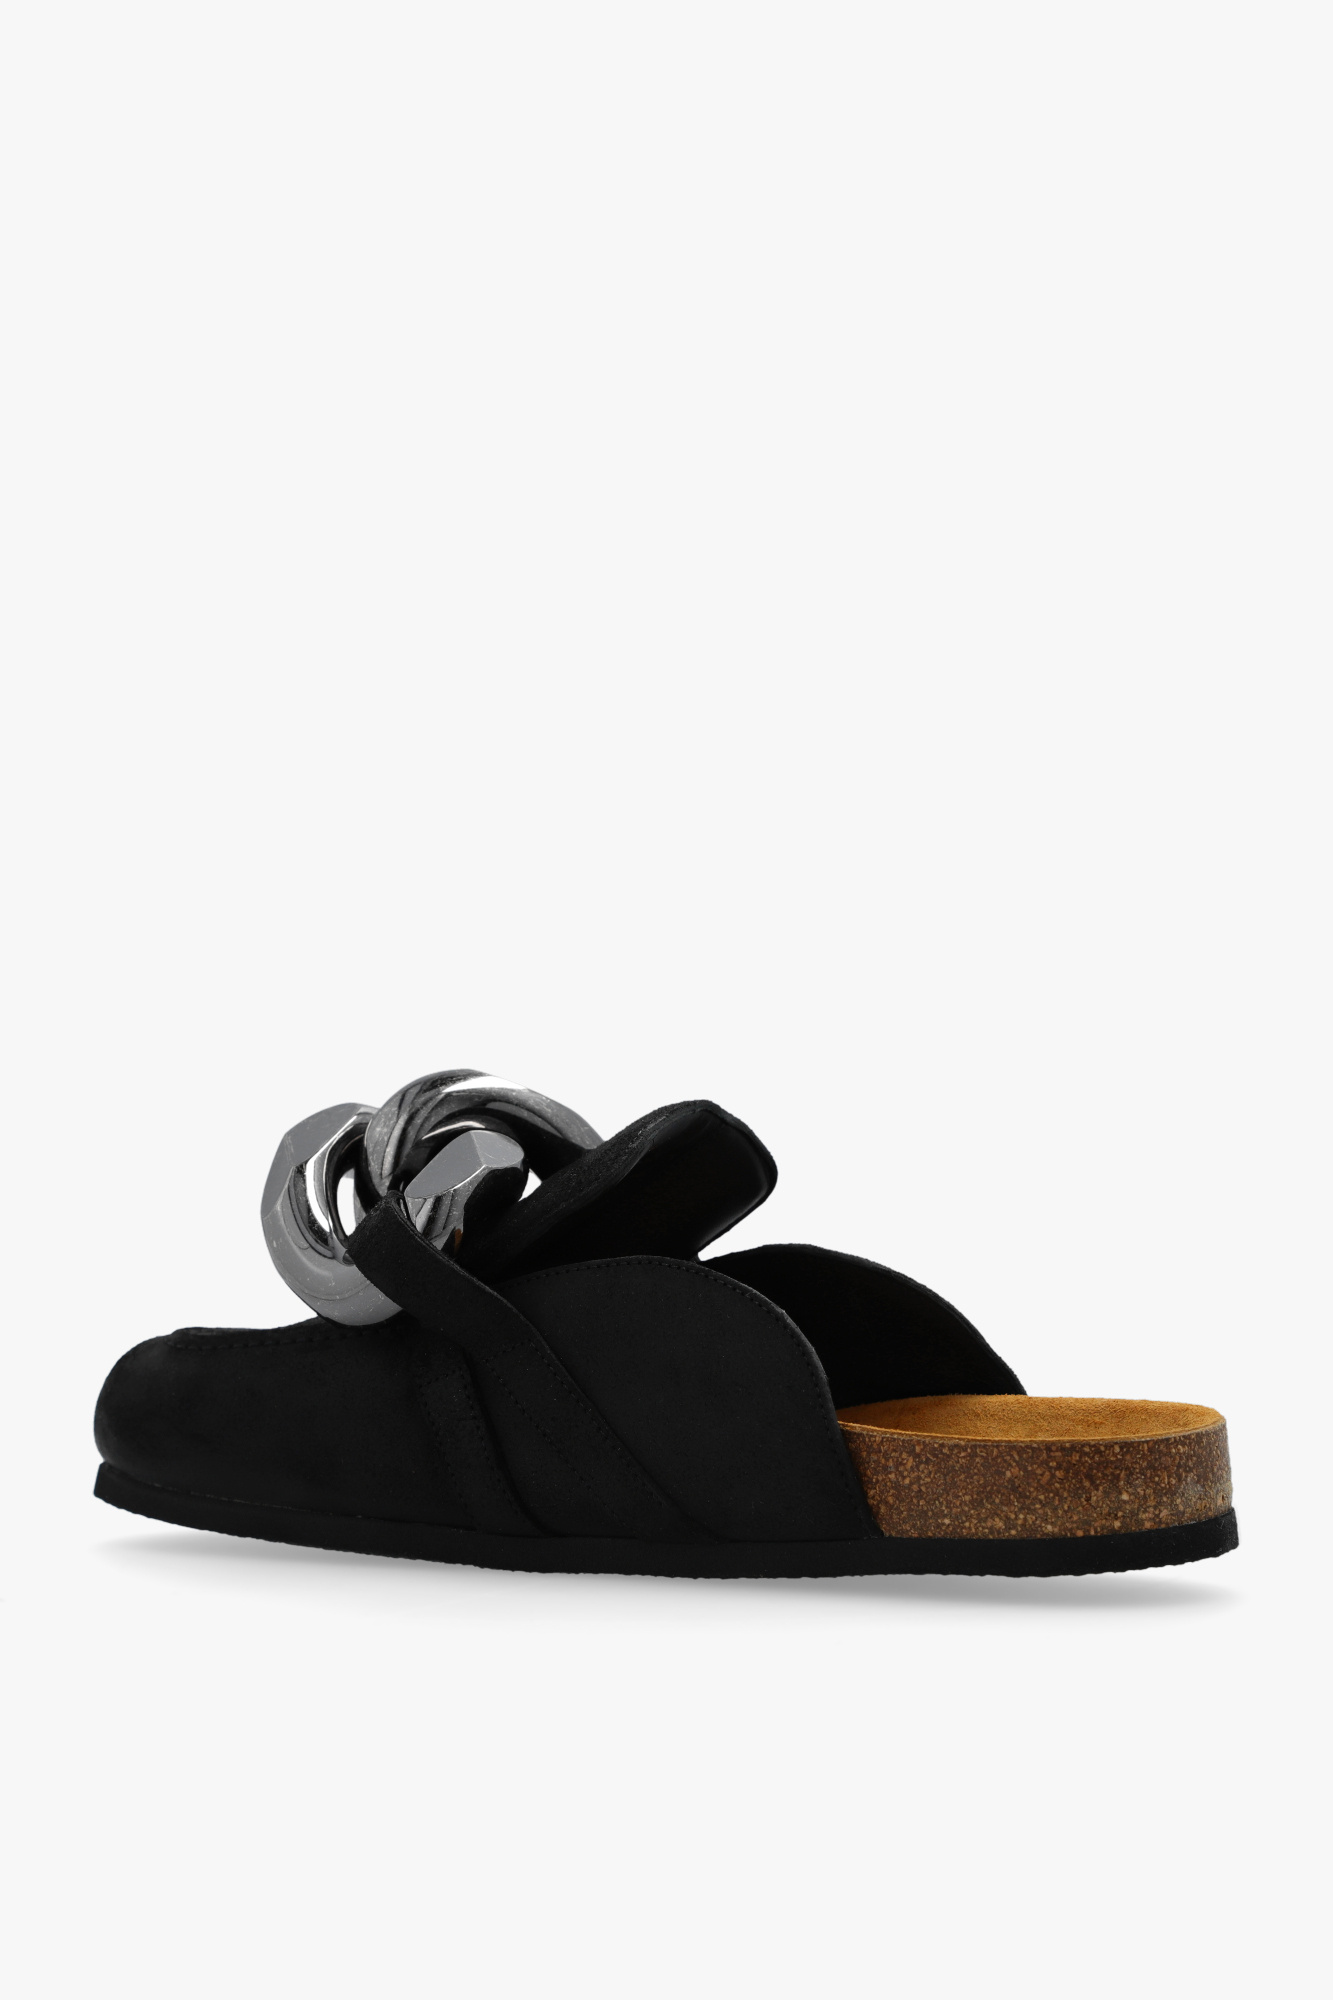 JW Anderson Carlos leather monk shoes Marrone